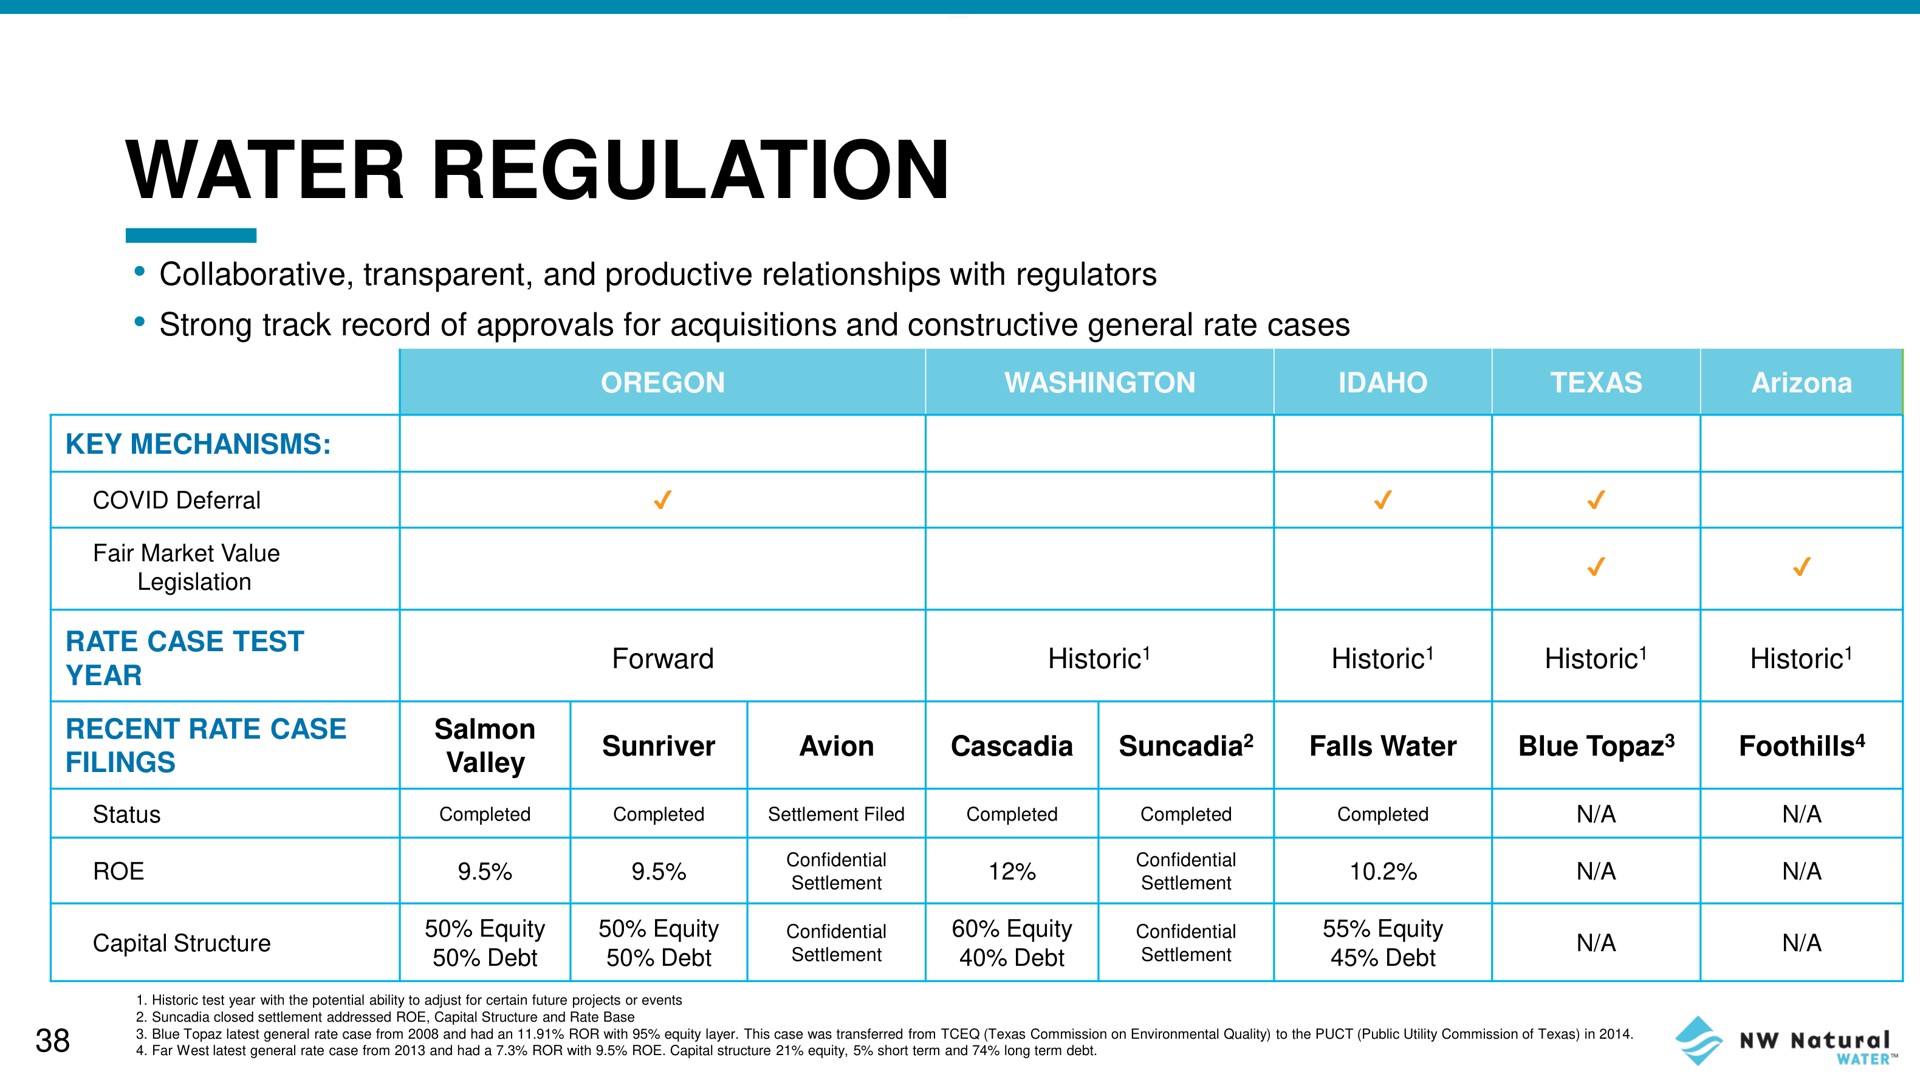 water regulation key mechanisms | NW Natural Holdings